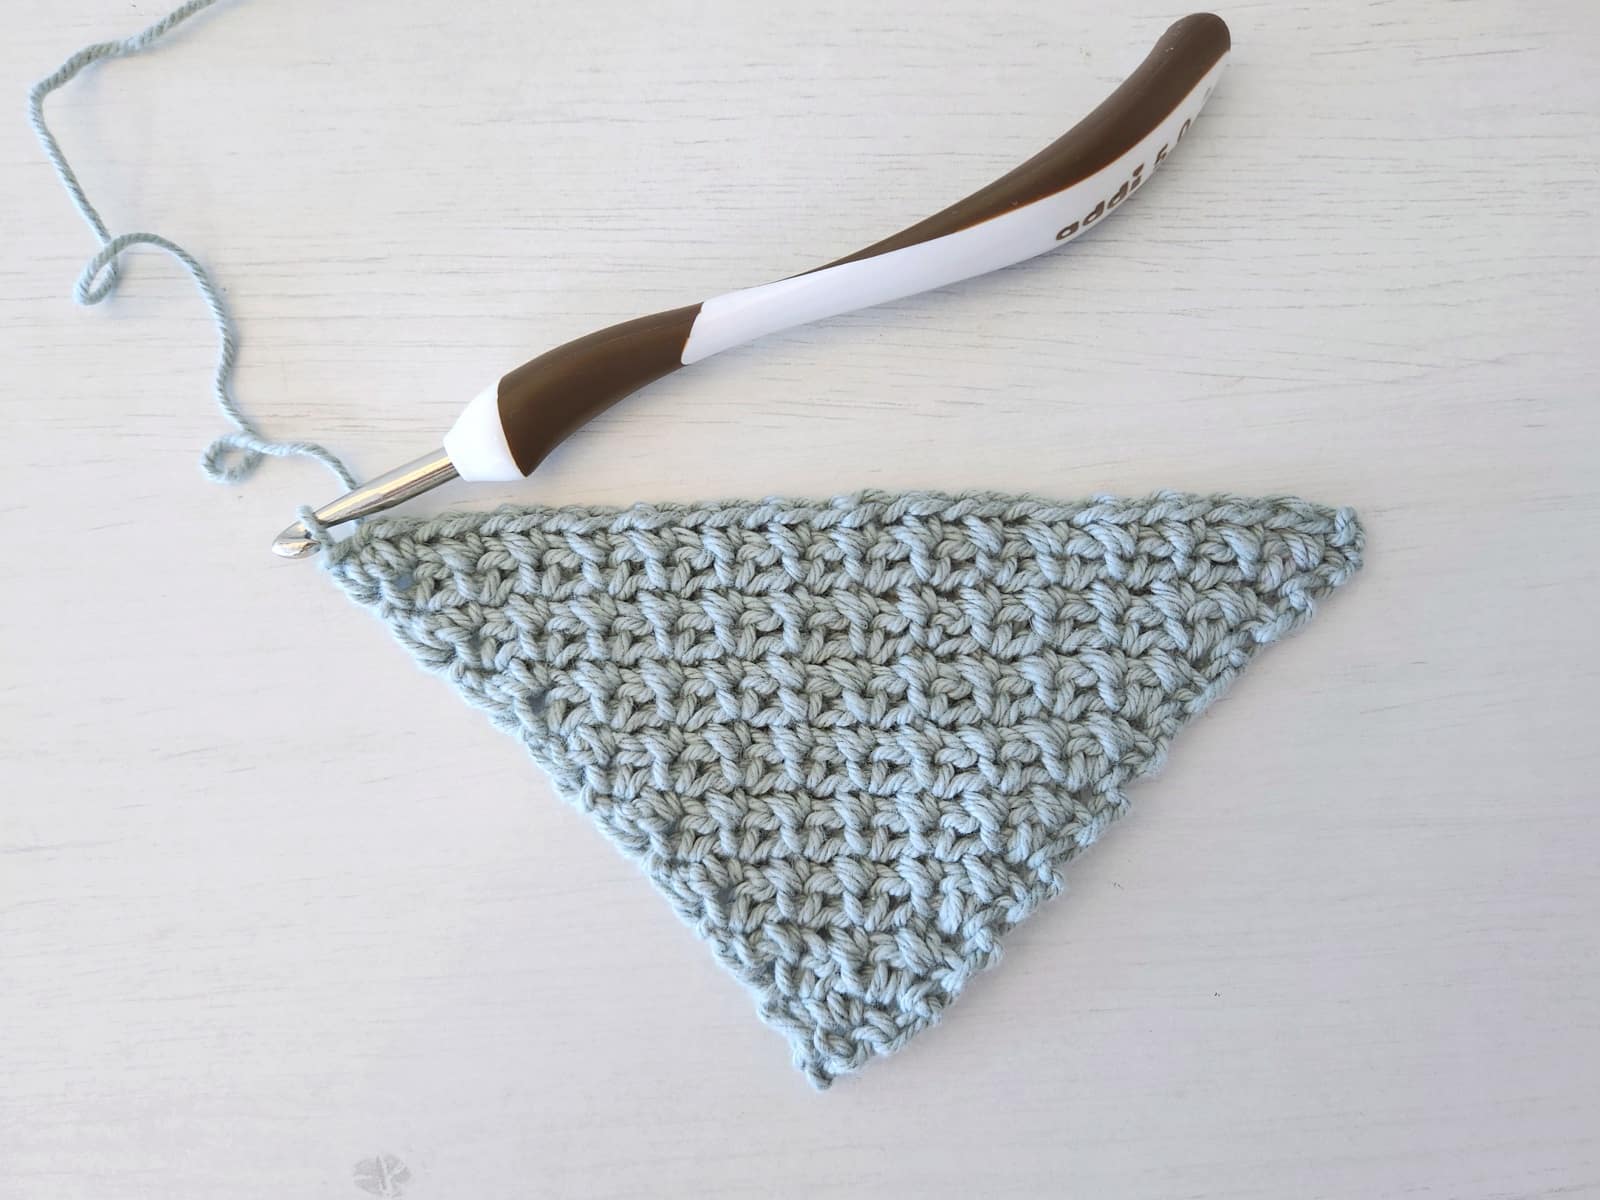 this is a photo crochet c2c mesh stitch pattern made by gootie